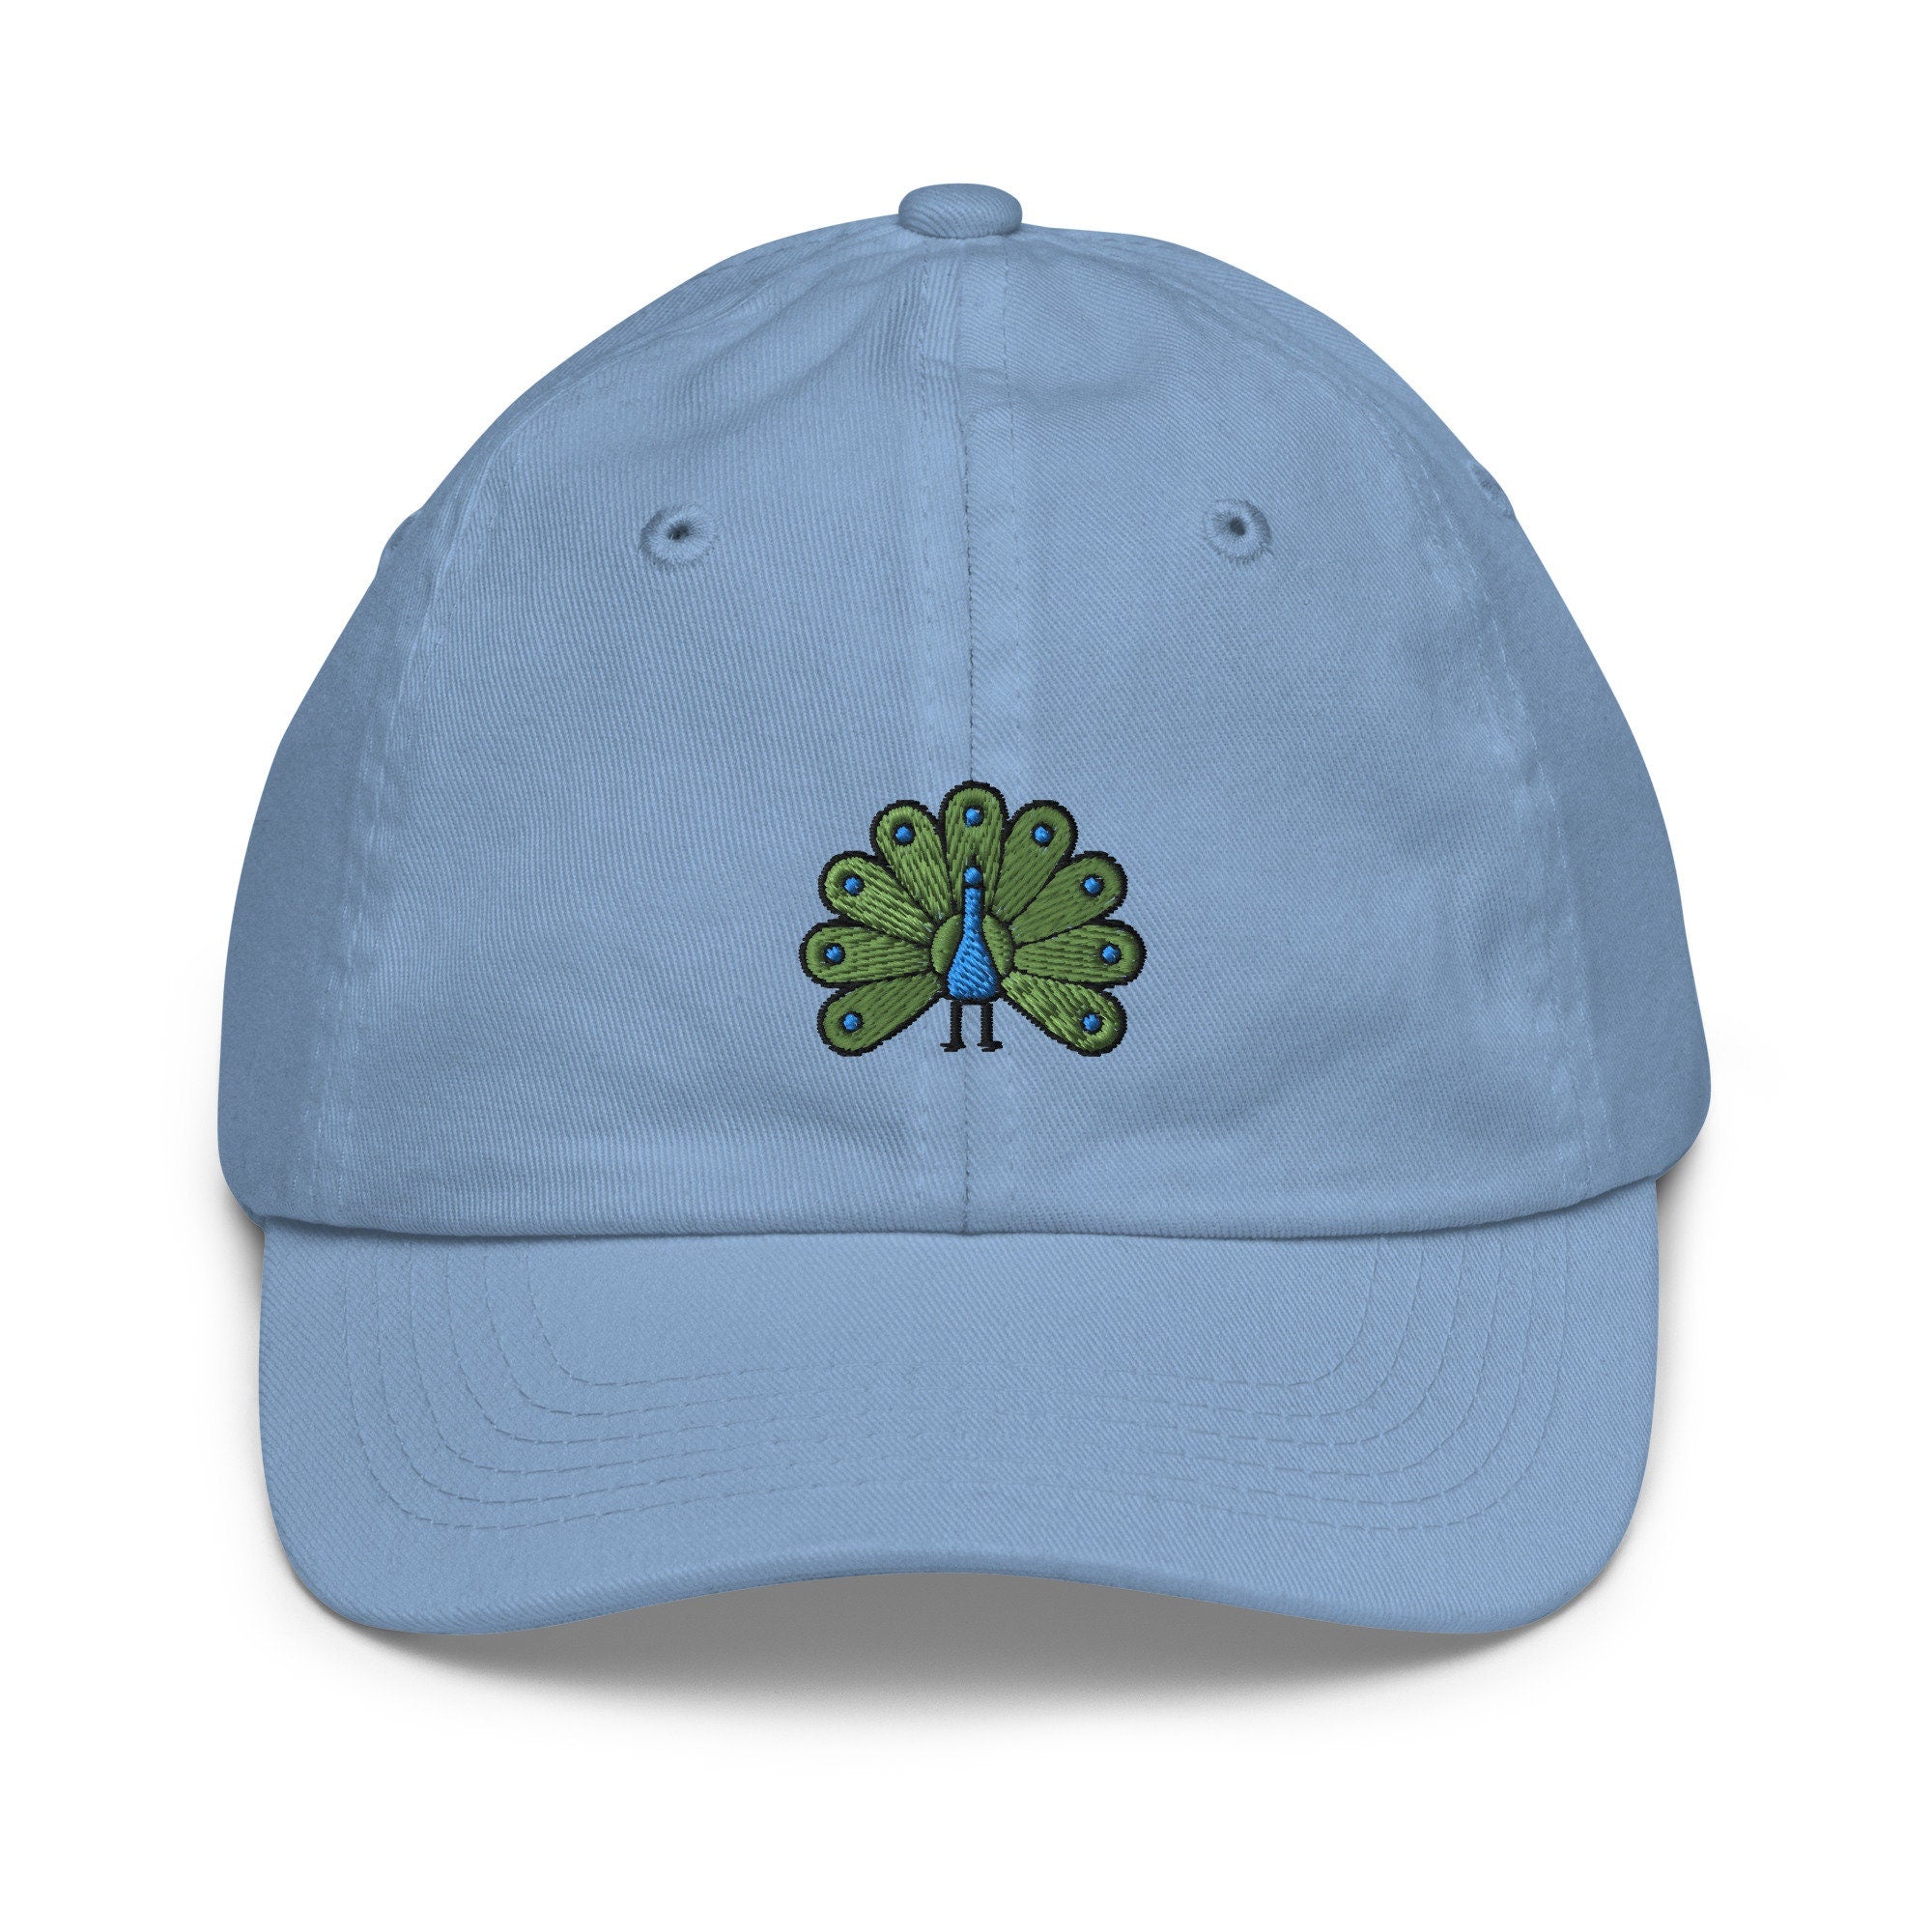 Peacock Youth Baseball Cap, Handmade Kids Hat, Embroidered Childrens Hat Gift - Multiple Colors